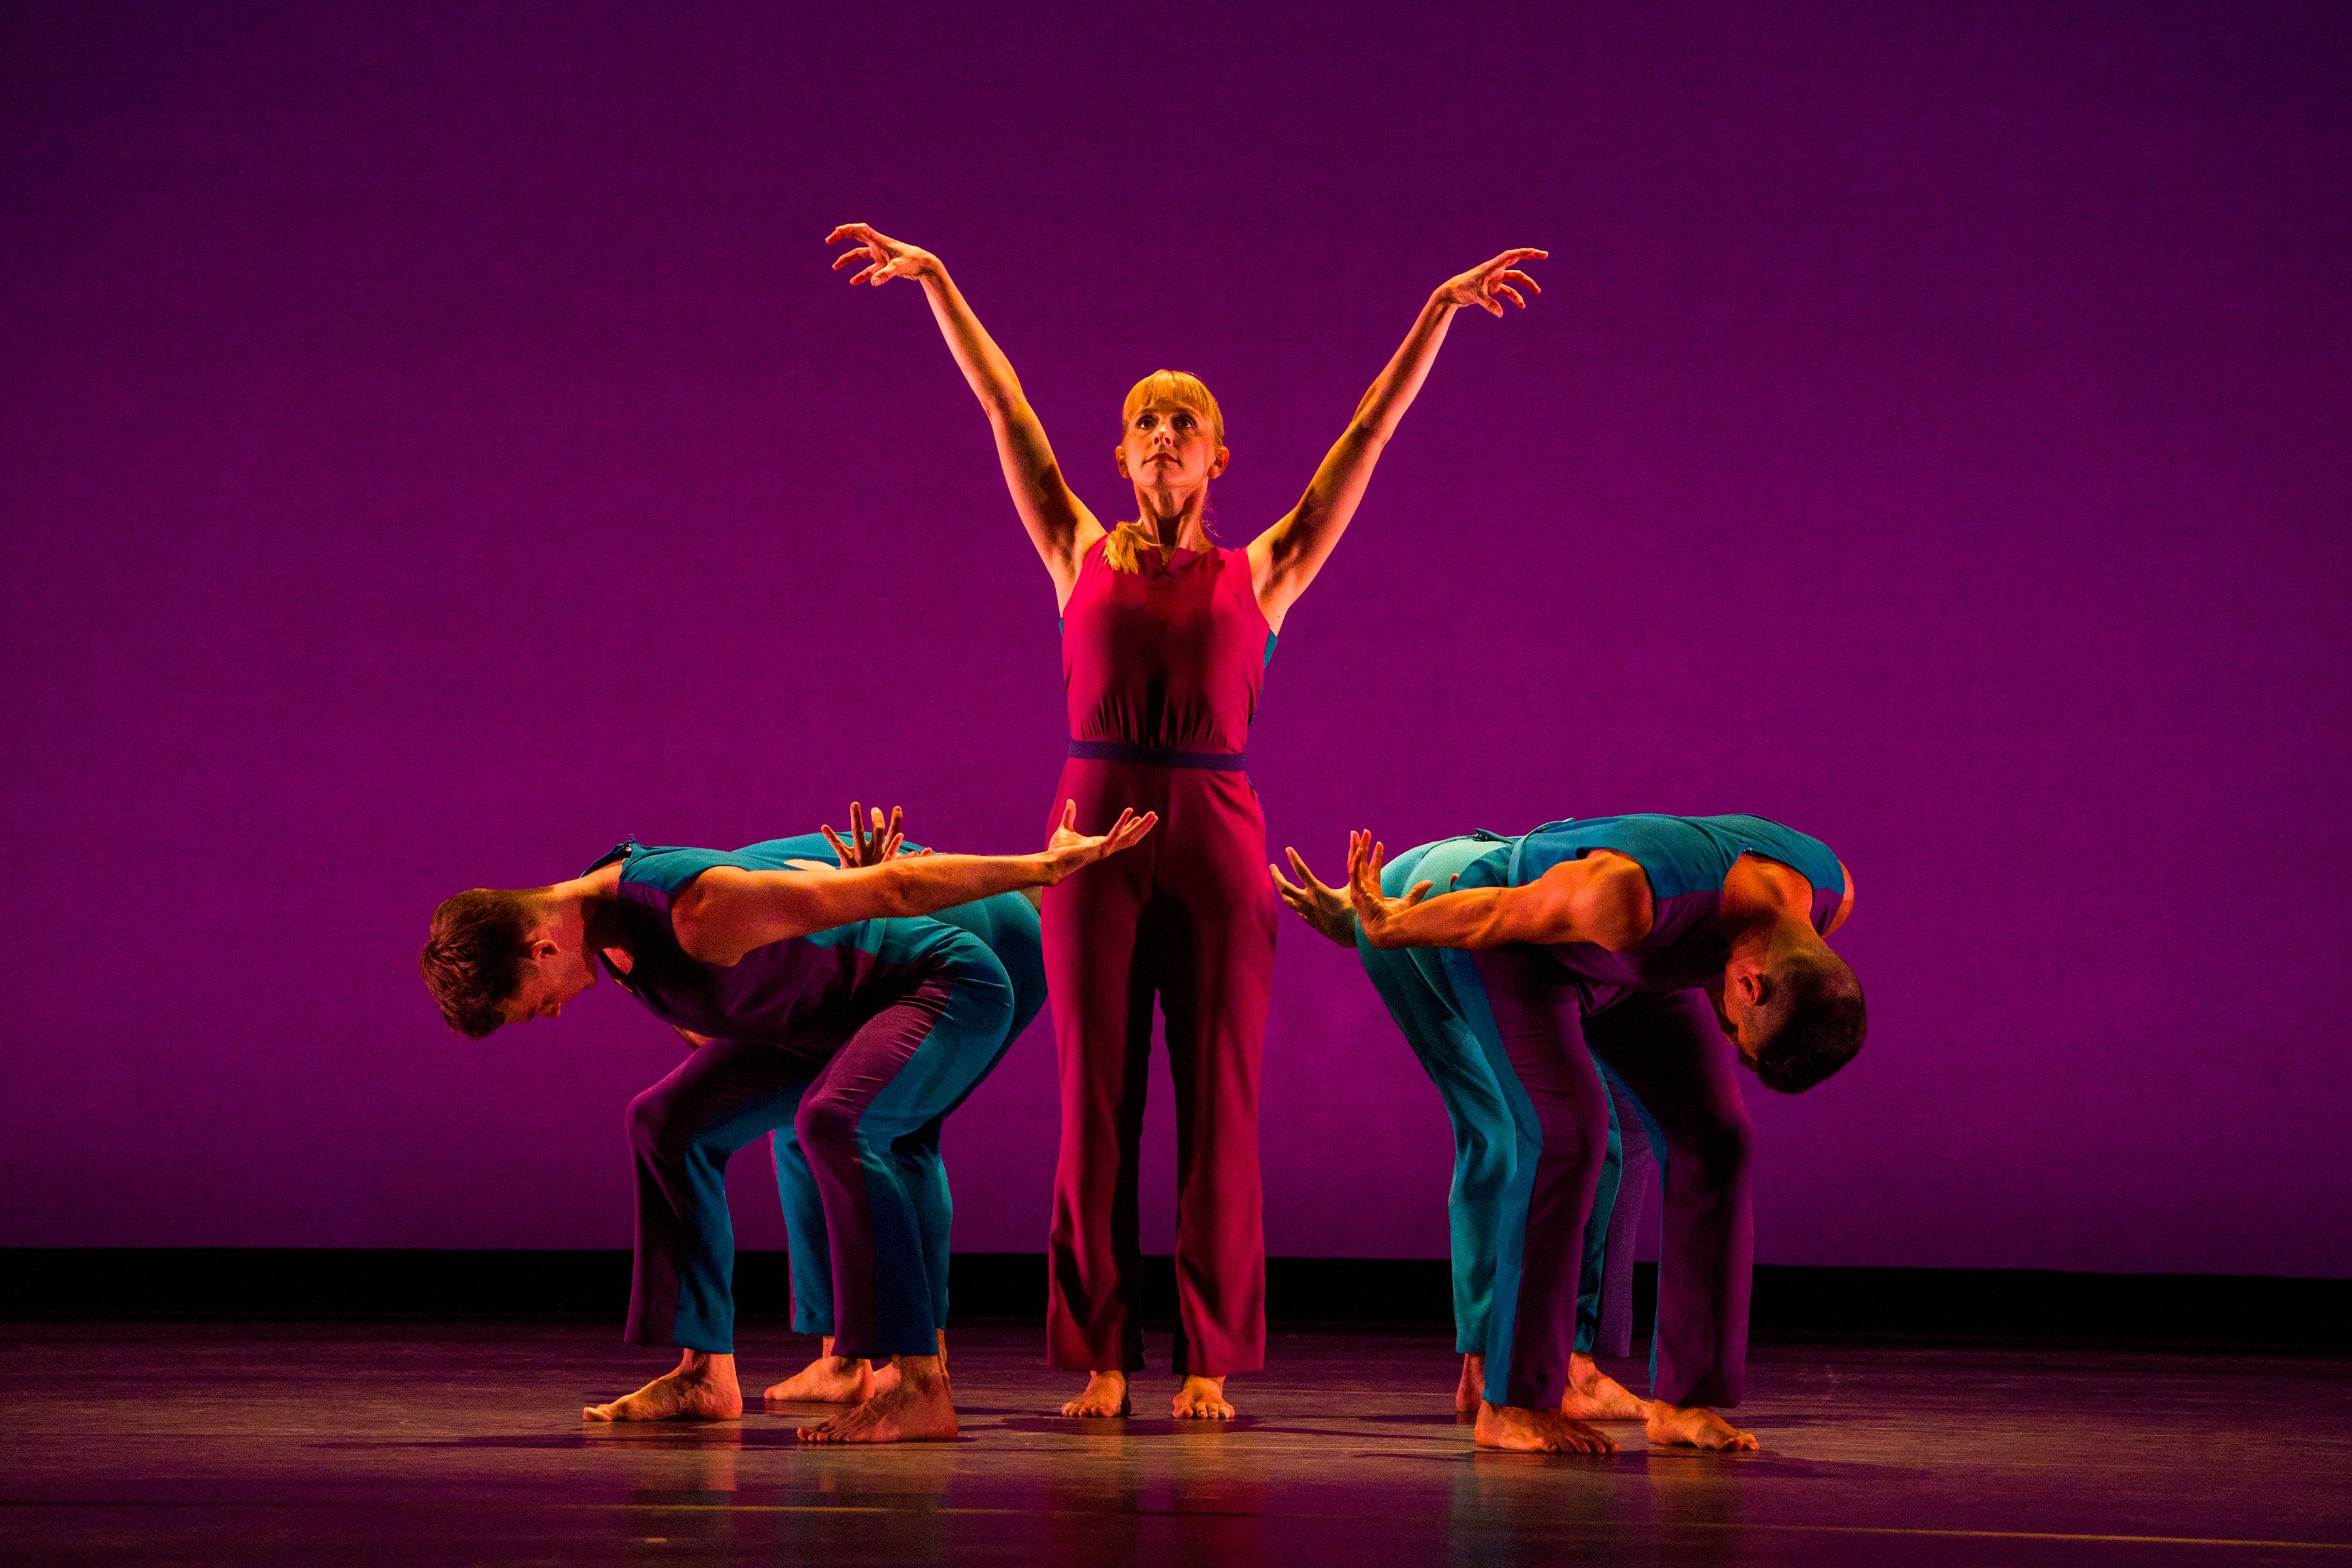  a dancers stands center with arms raised overhead while other dancers bend forward and away